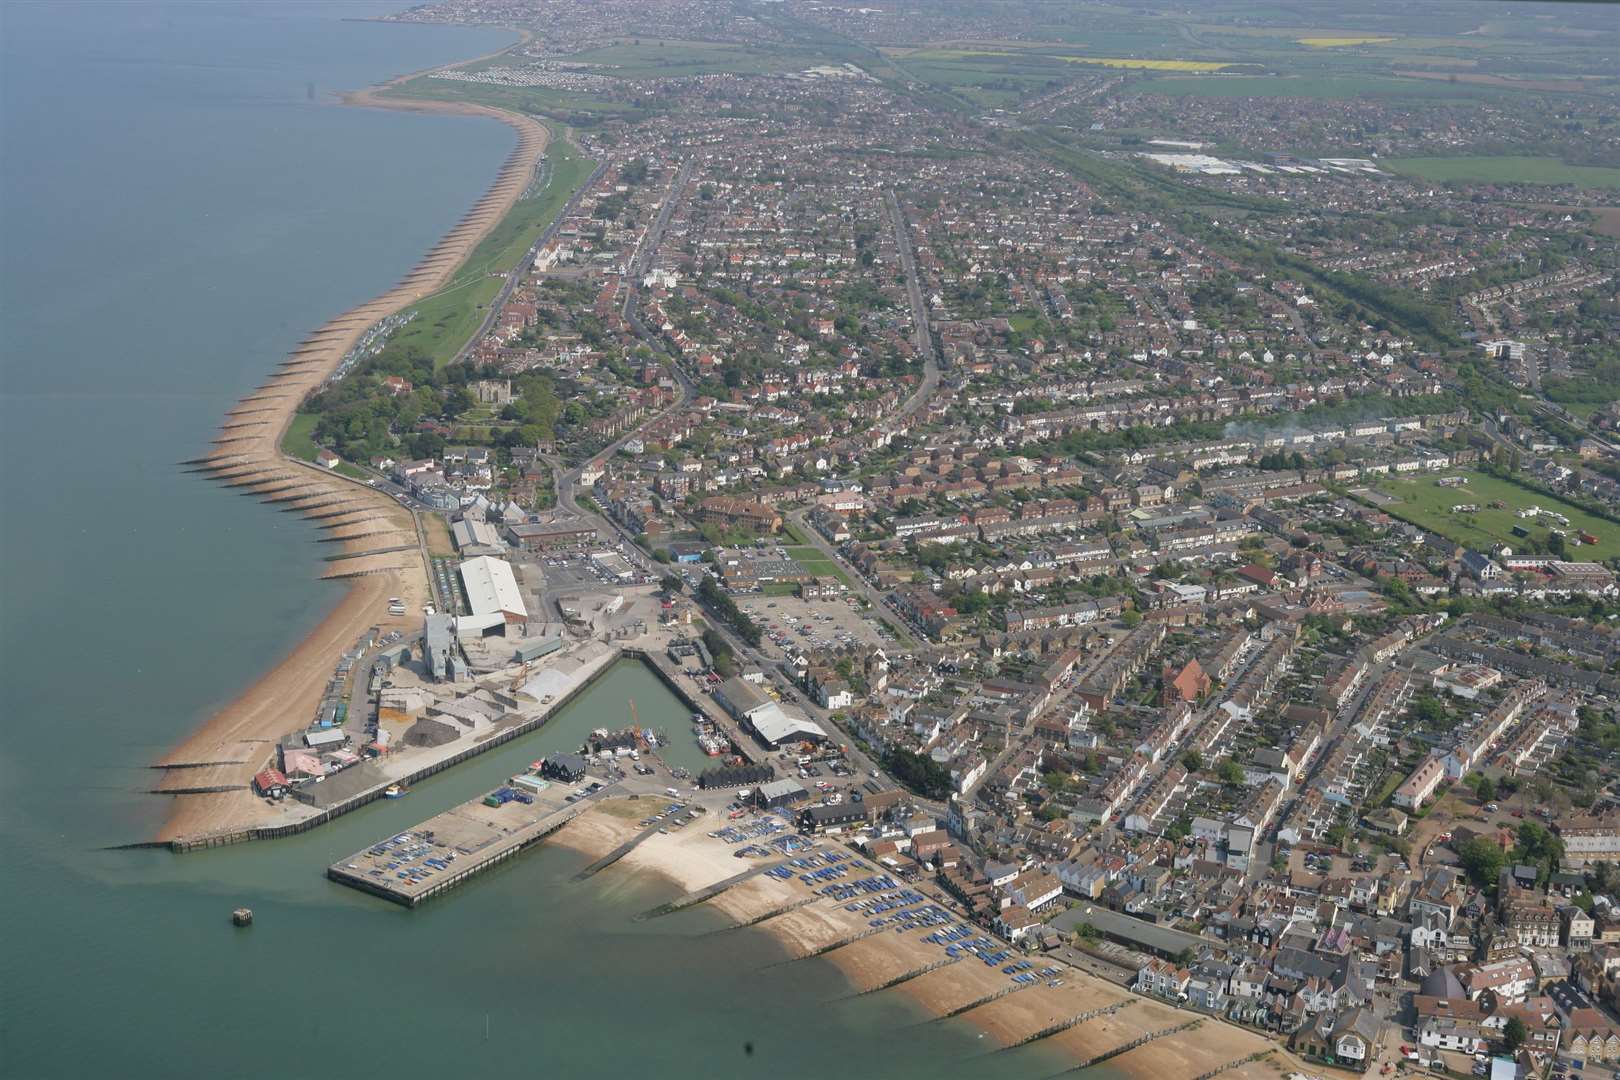 Whitstable is considered less affordable than Herne Bay